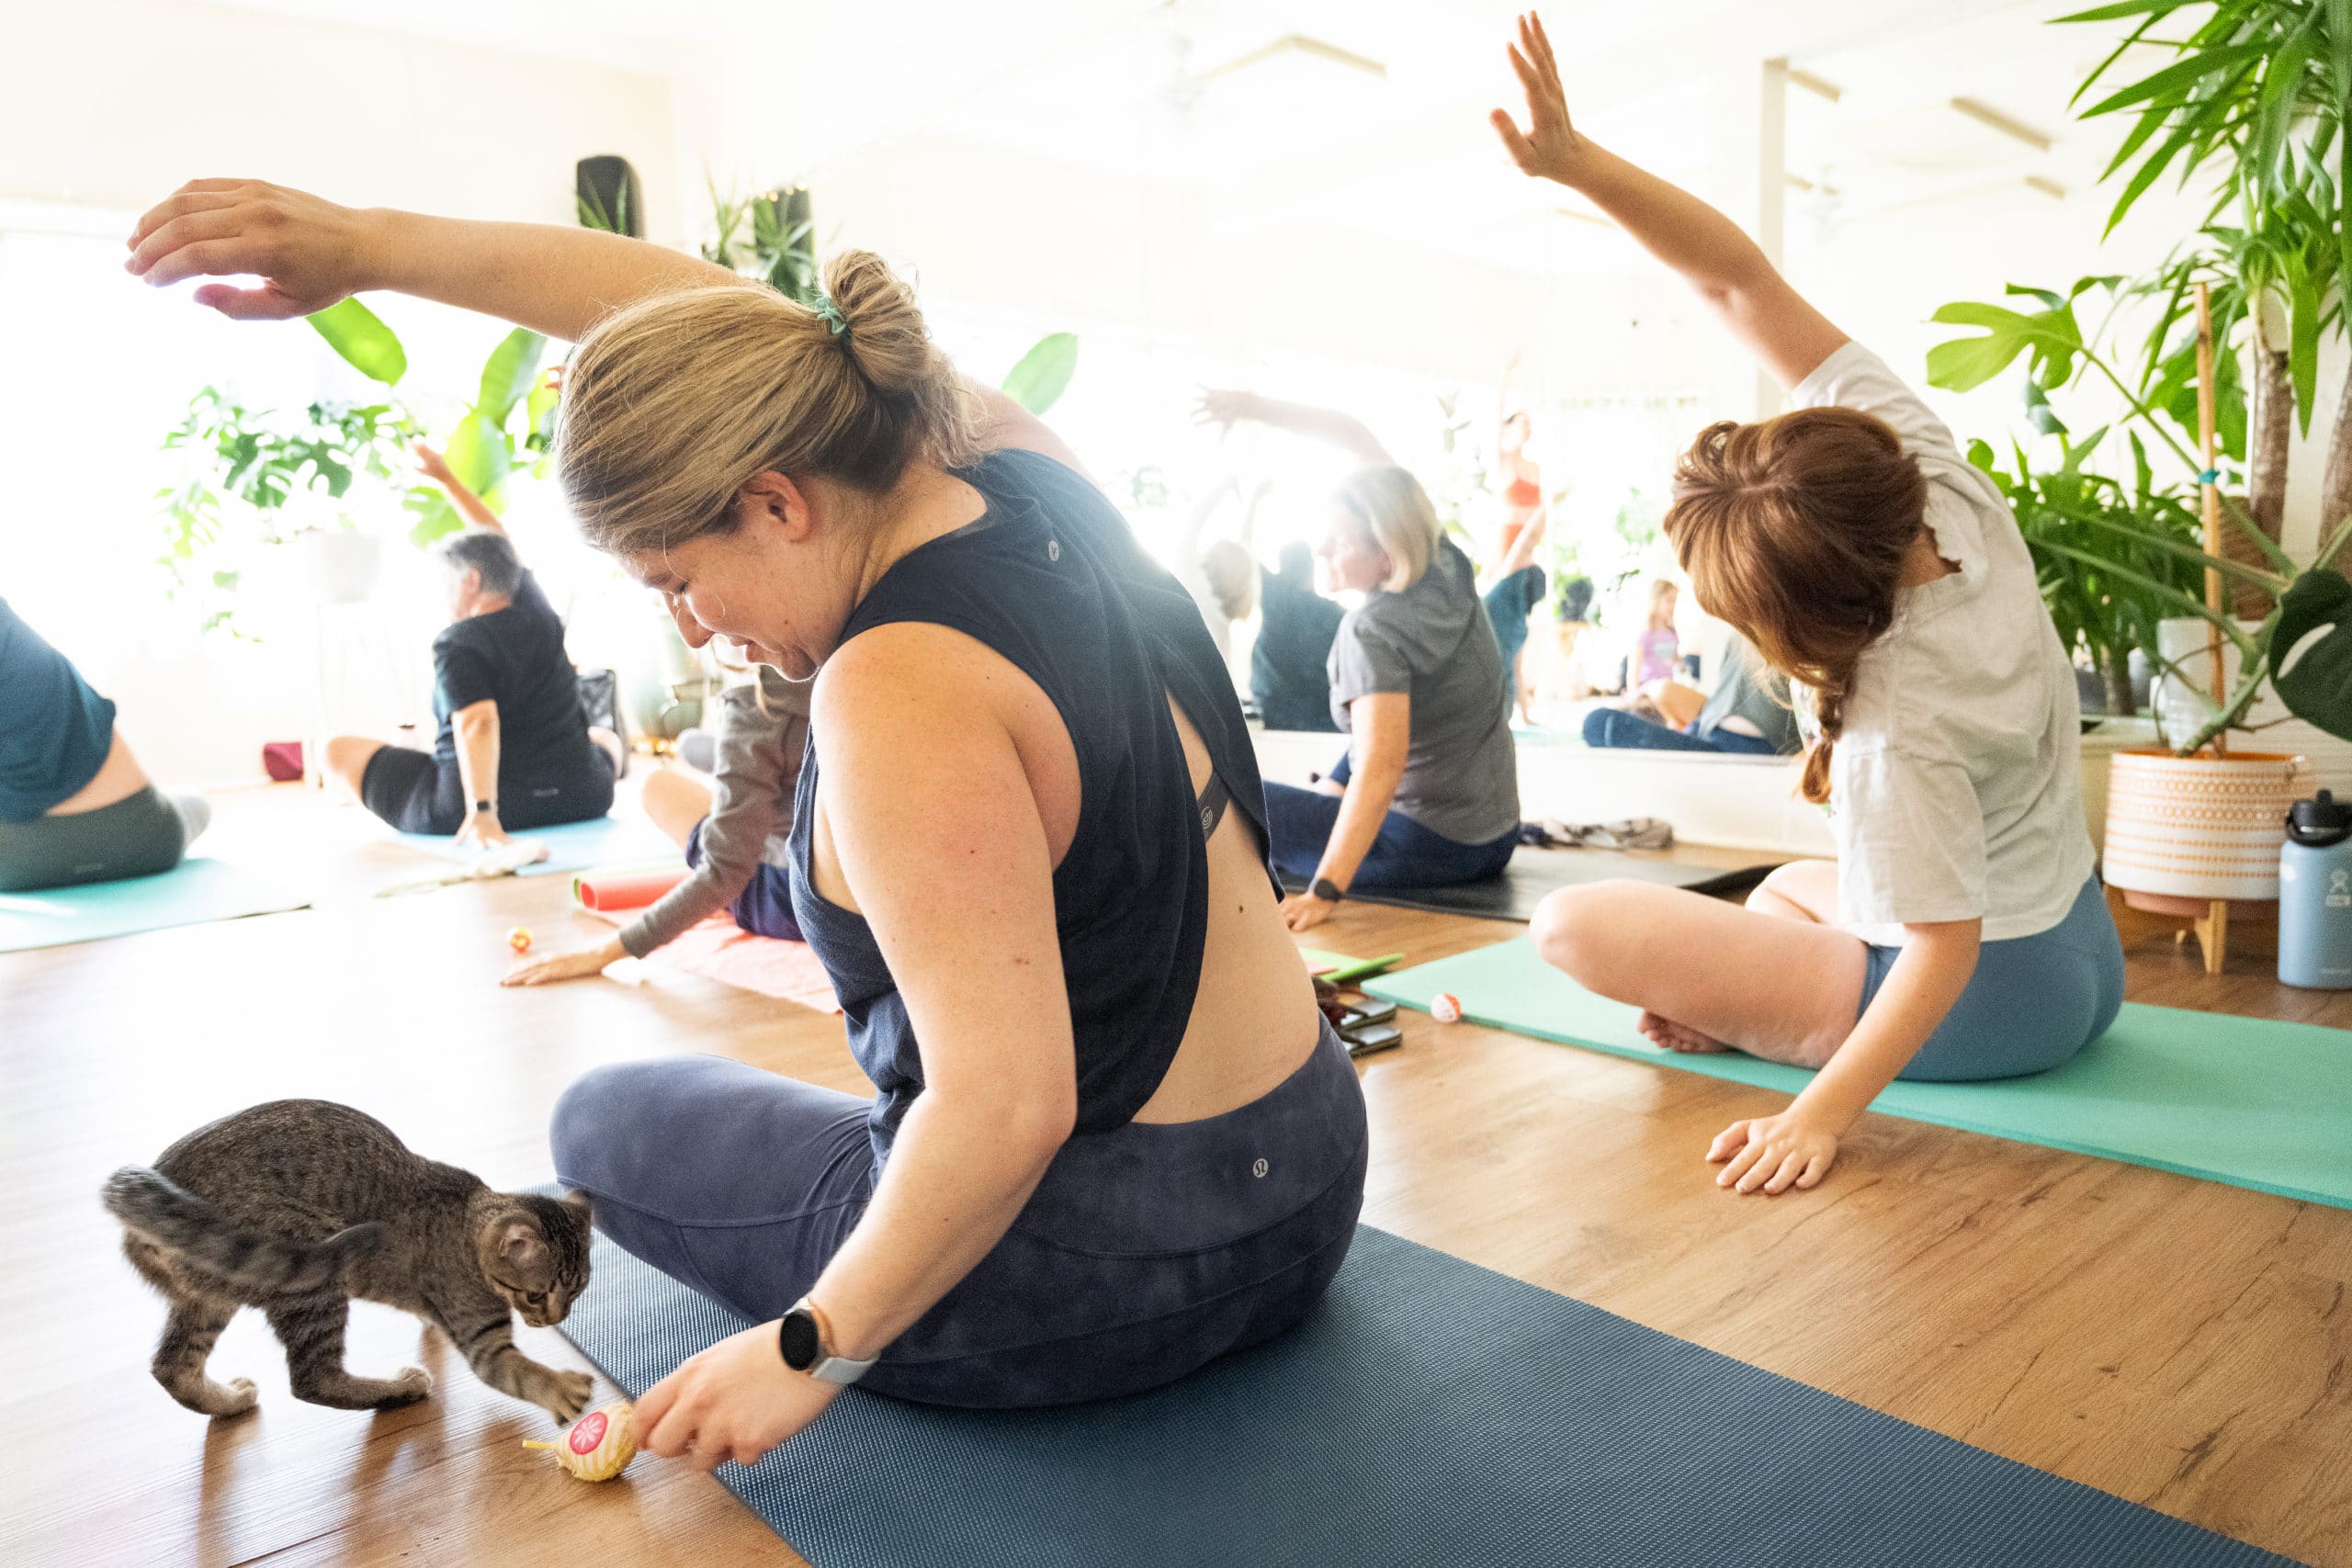 You are currently viewing Business Storytelling: Kitten Yoga at her Elevated with Front Street Animals